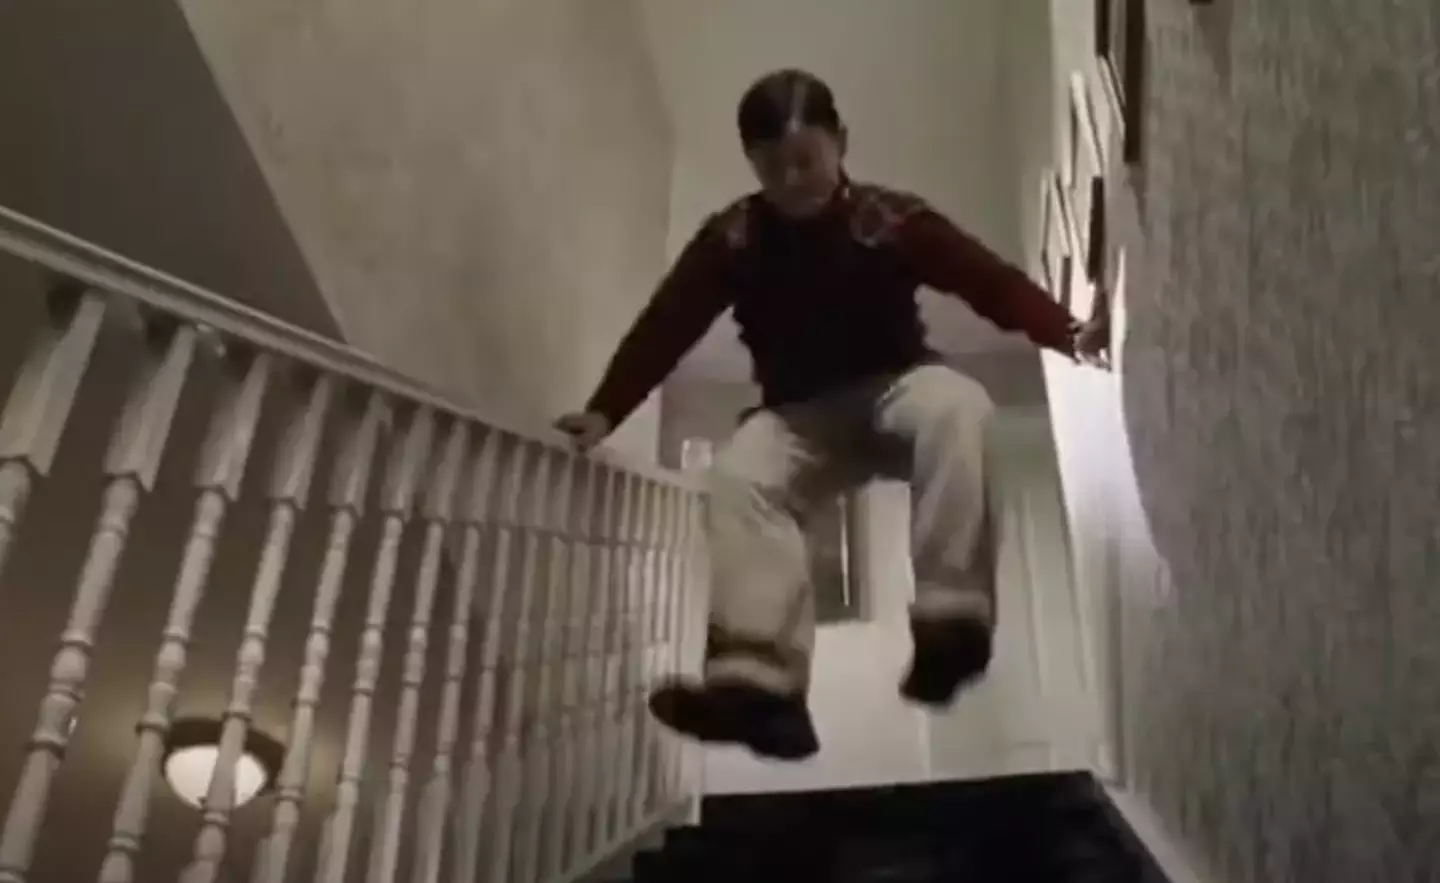 Dudley stomps down the stairs to wake Harry.